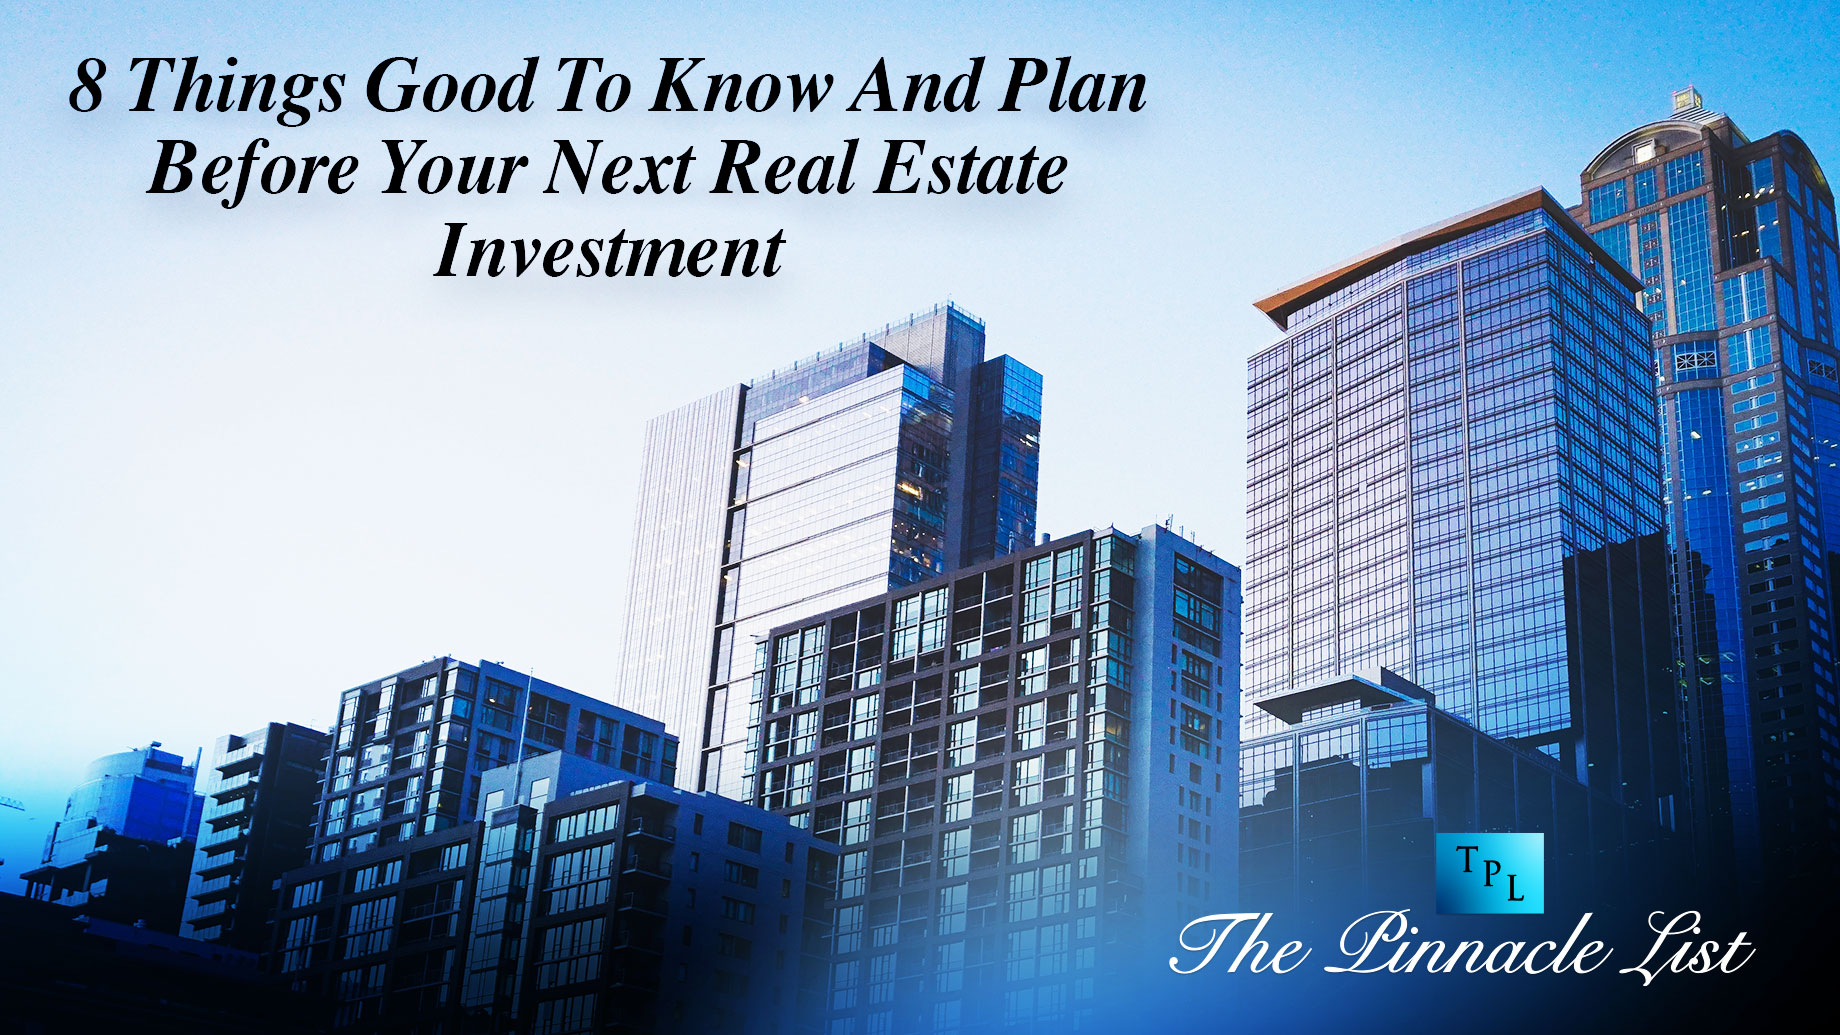 8 Things Good To Know And Plan Before Your Next Real Estate Investment